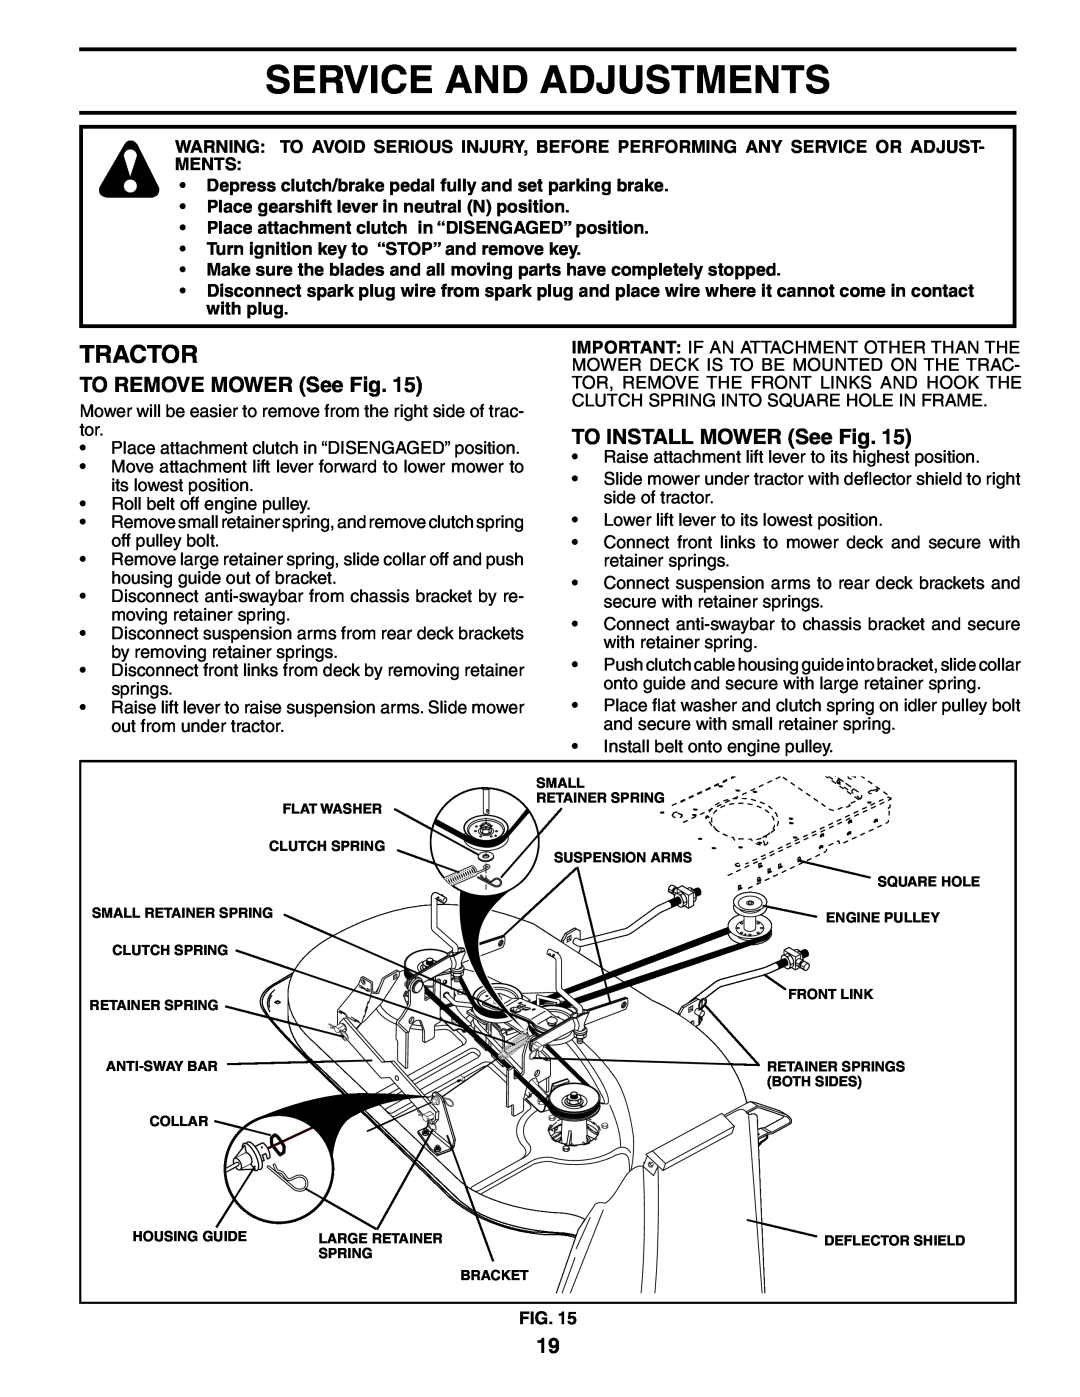 Weed Eater 184404, WE1338A manual Service And Adjustments, TO REMOVE MOWER See Fig, TO INSTALL MOWER See Fig, Tractor 